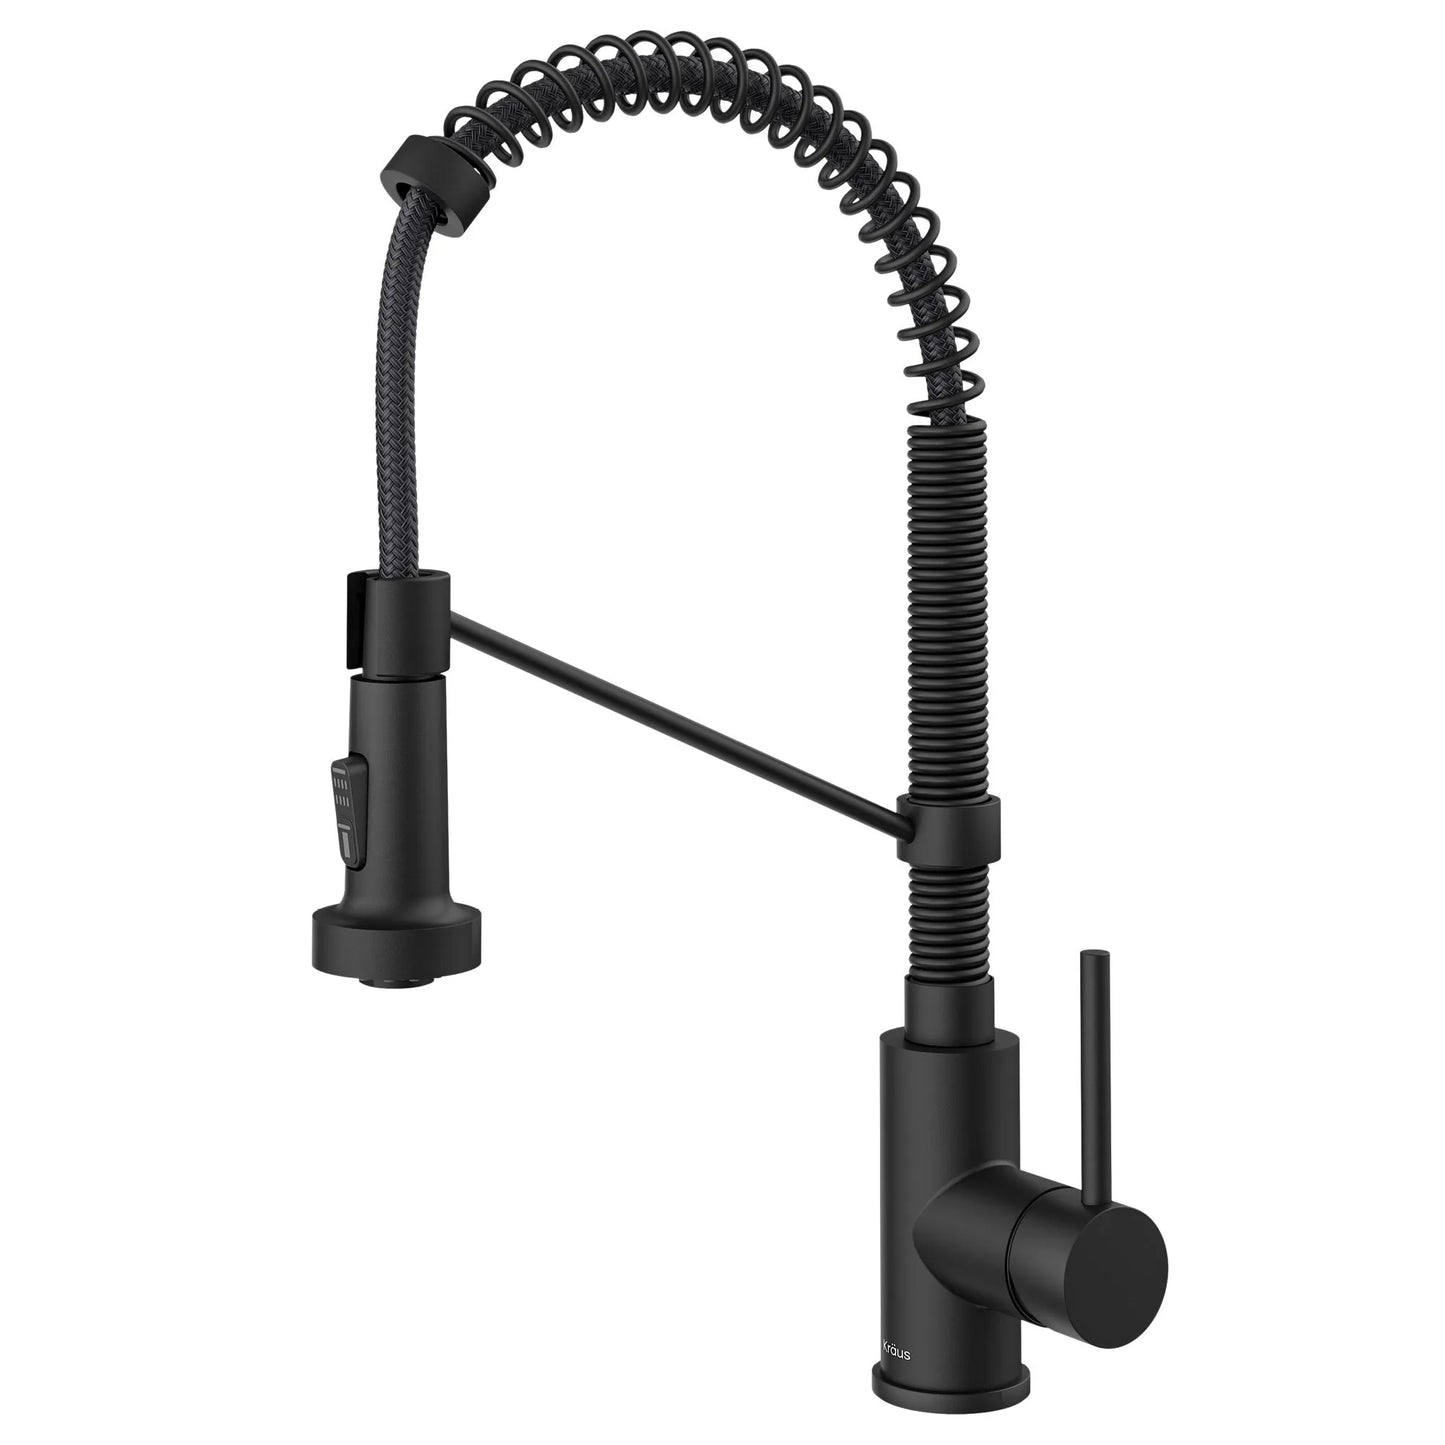 Kraus Bolden Series  KPF1610MB Single Handle Pull Down Commercial Kitchen Faucet 1.8 GPM Flow Rate, Reach Technology, 2-Function Faucet, High-Arc 180 Swivel Spout, Lead-Free Braided Nylon Waterway, ADA Complaint,Matte Black, 369281